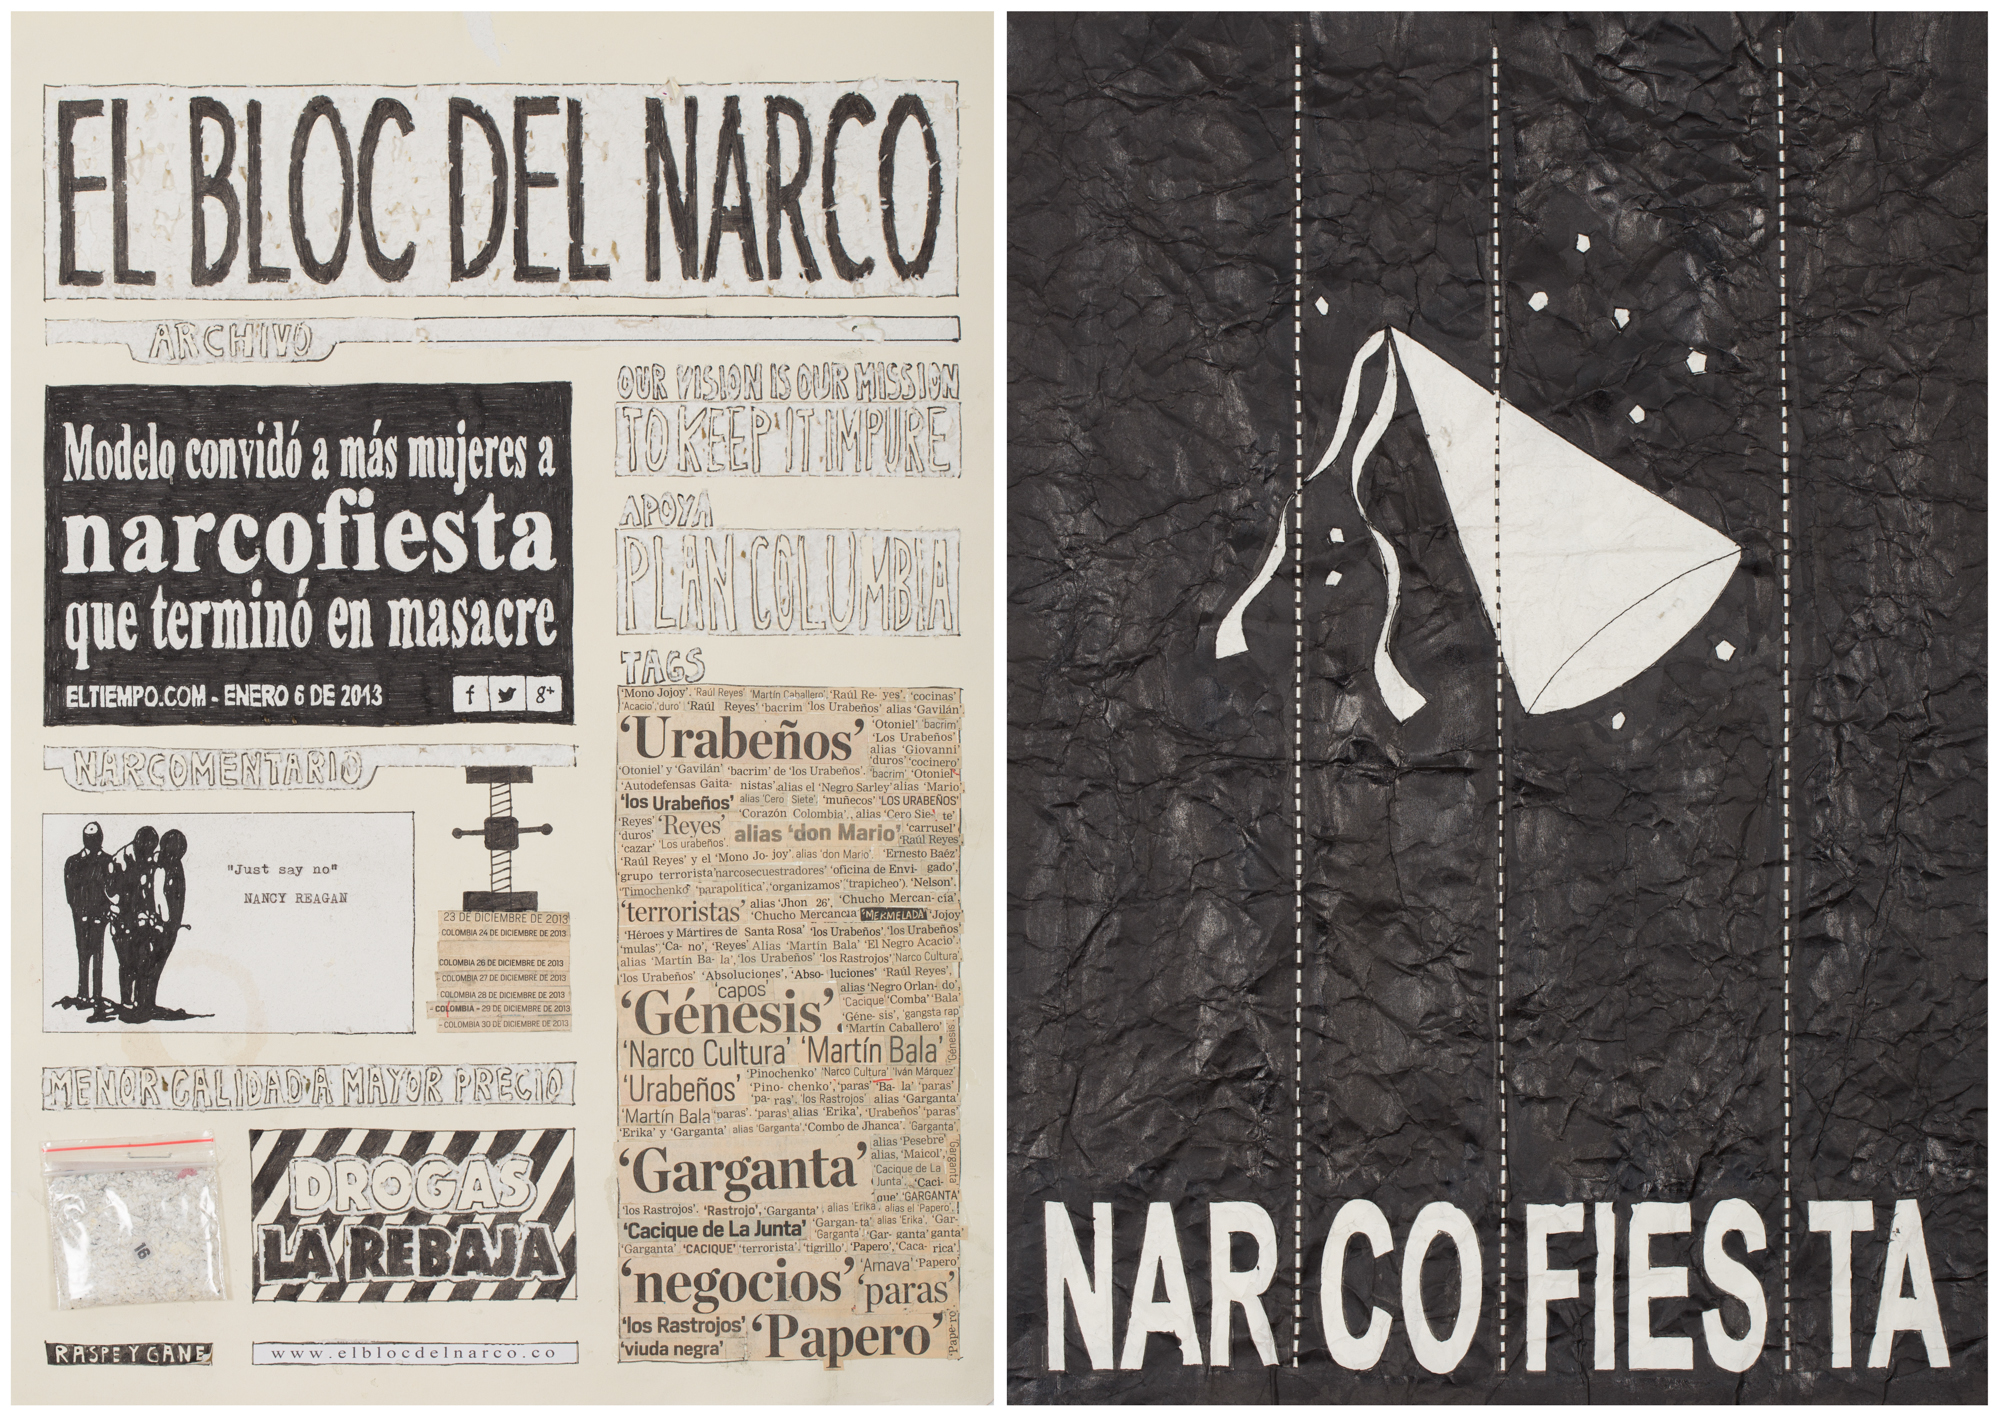 Camilo Restrepo. <em>El Bloc Del Narco #16</em>, 2016. Ink, water-soluble wax pastel, tape, glue, newspaper clippings, staples, plastic bag, paper dust and saliva on paper, 16 1/2 x 24 inches (41.9 x 61 cm)